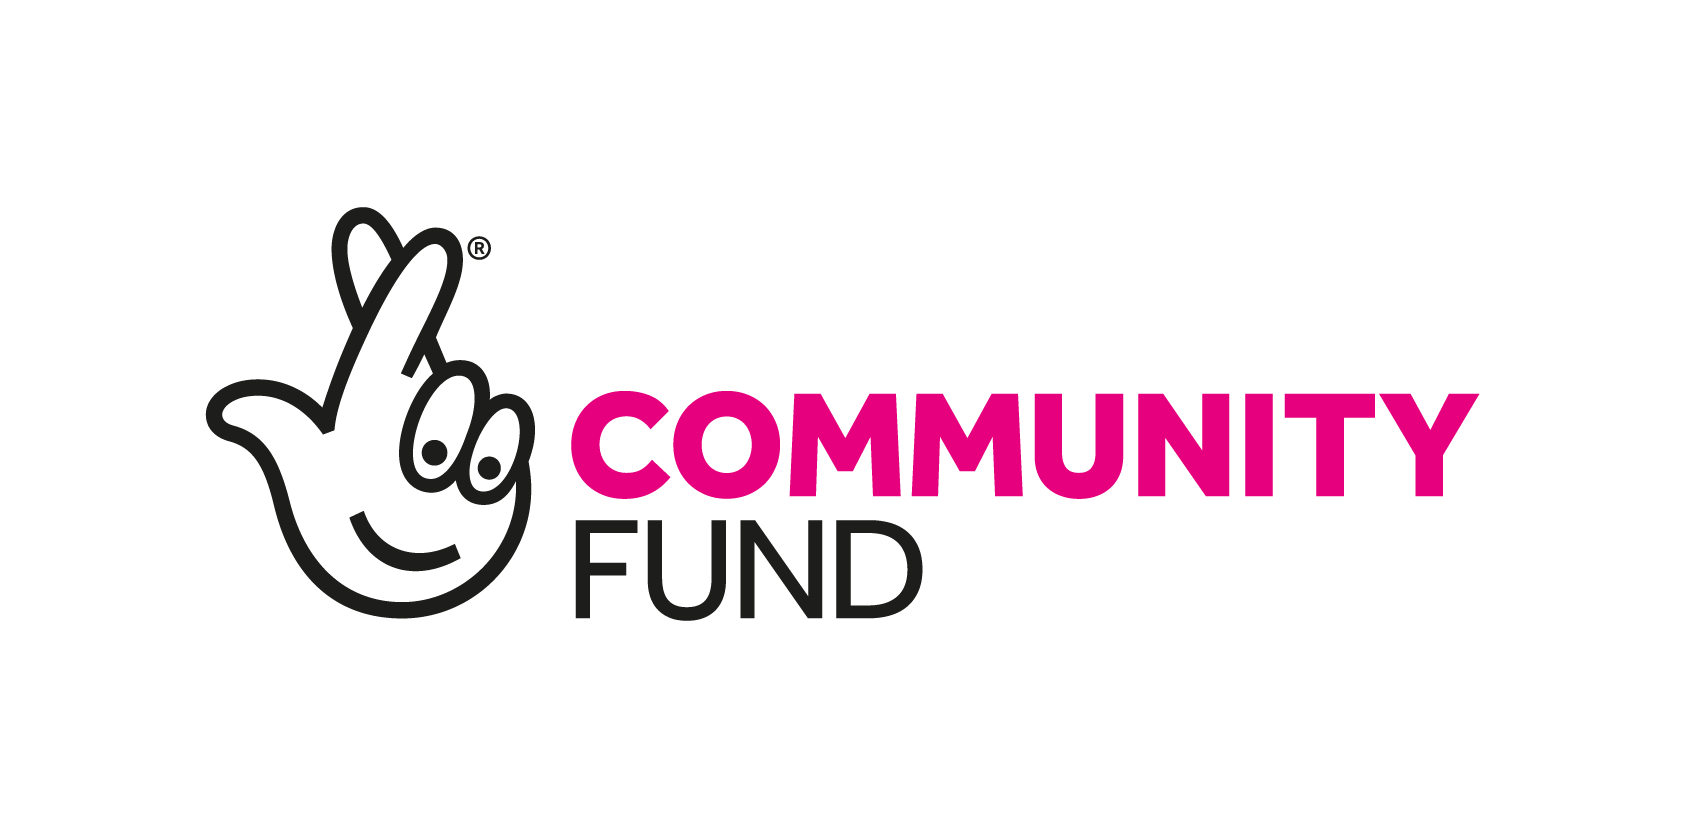 Bath Mind is awarded National Lottery’s Reaching Communities Fund